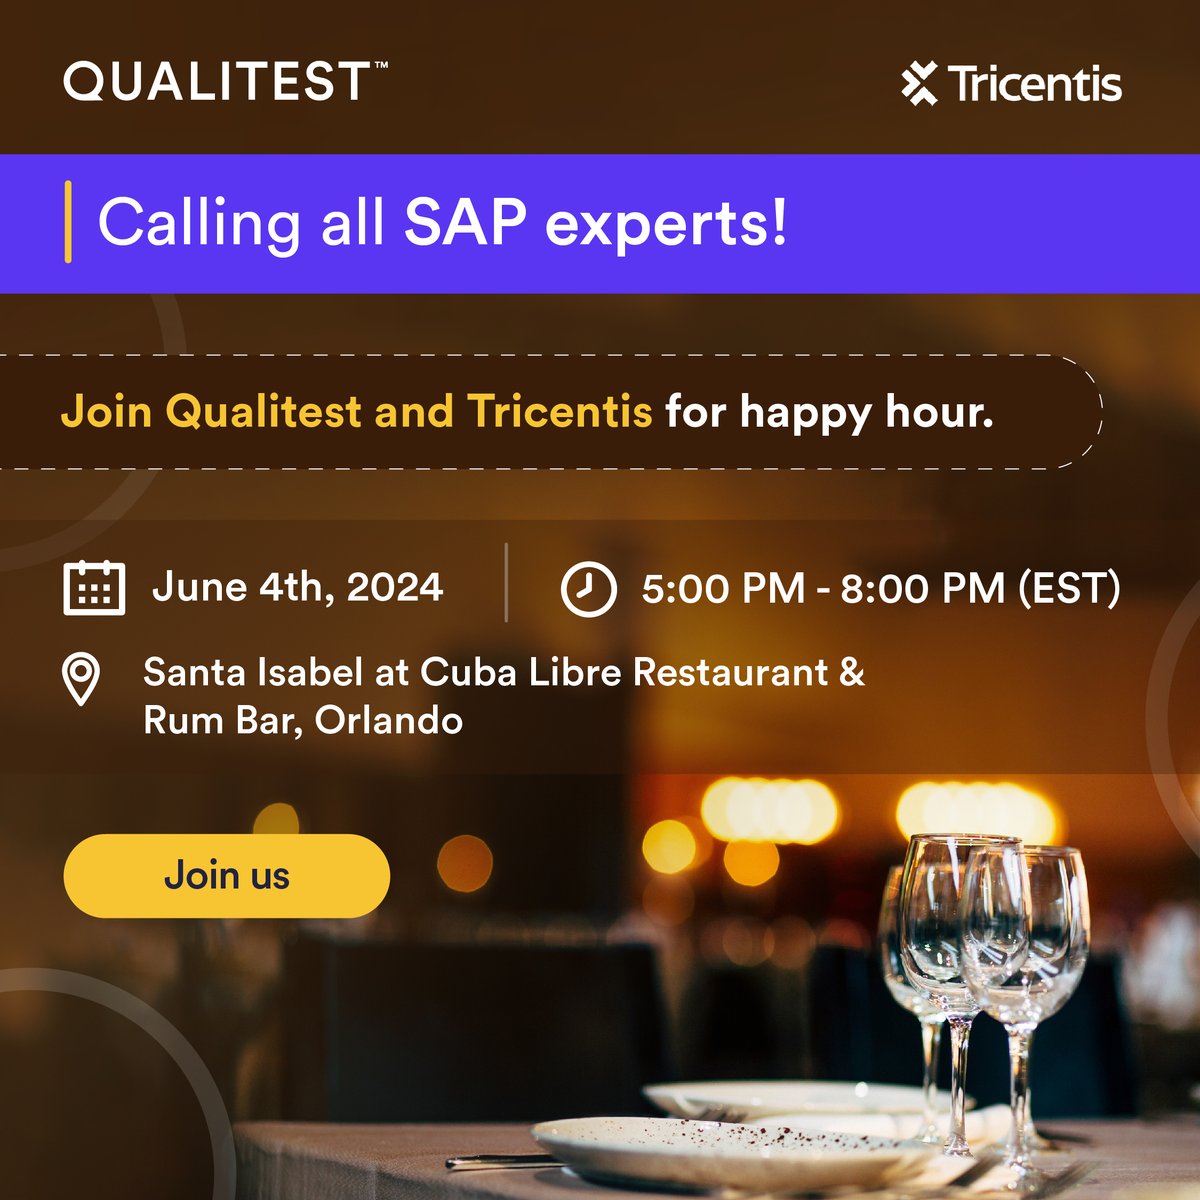 Excited to connect at #SAPSapphire Orlando, June 3-5! Top it off with our exclusive Happy Hour on June 4 at Cuba Libre Restaurant & Rum Bar.
Spots are filling up fast. Secure yours now 👉bit.ly/3vXsqE3
#SAPSapphire #QualitestAtSAPSapphire #LifeAtQualitest